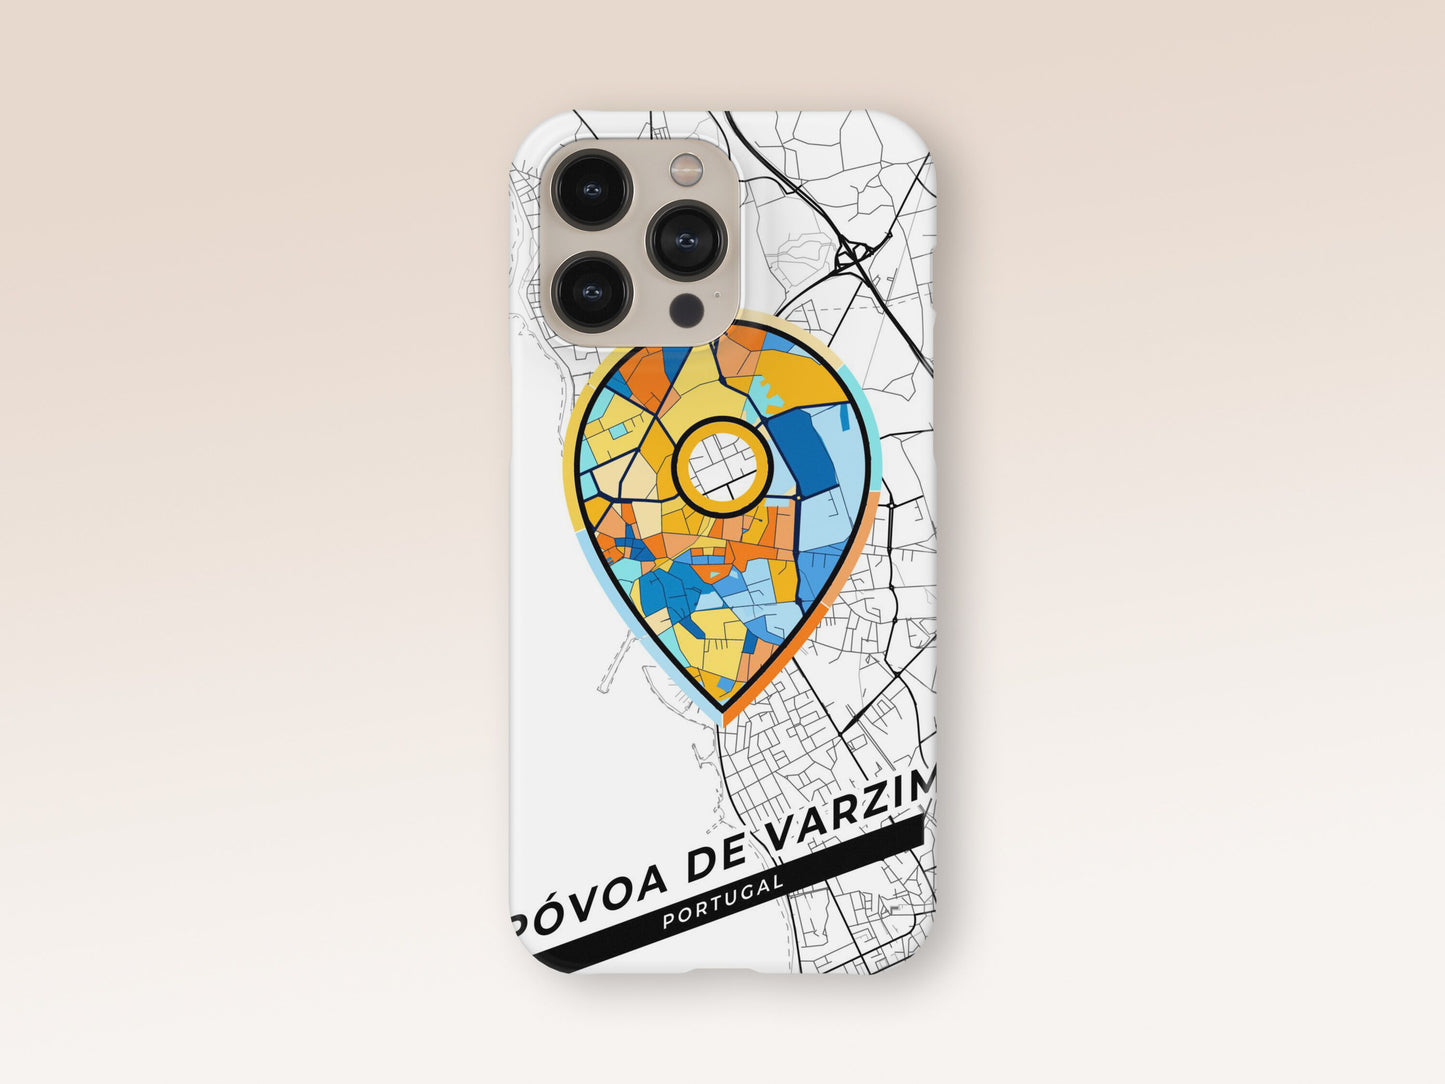 Póvoa De Varzim Portugal slim phone case with colorful icon. Birthday, wedding or housewarming gift. Couple match cases. 1